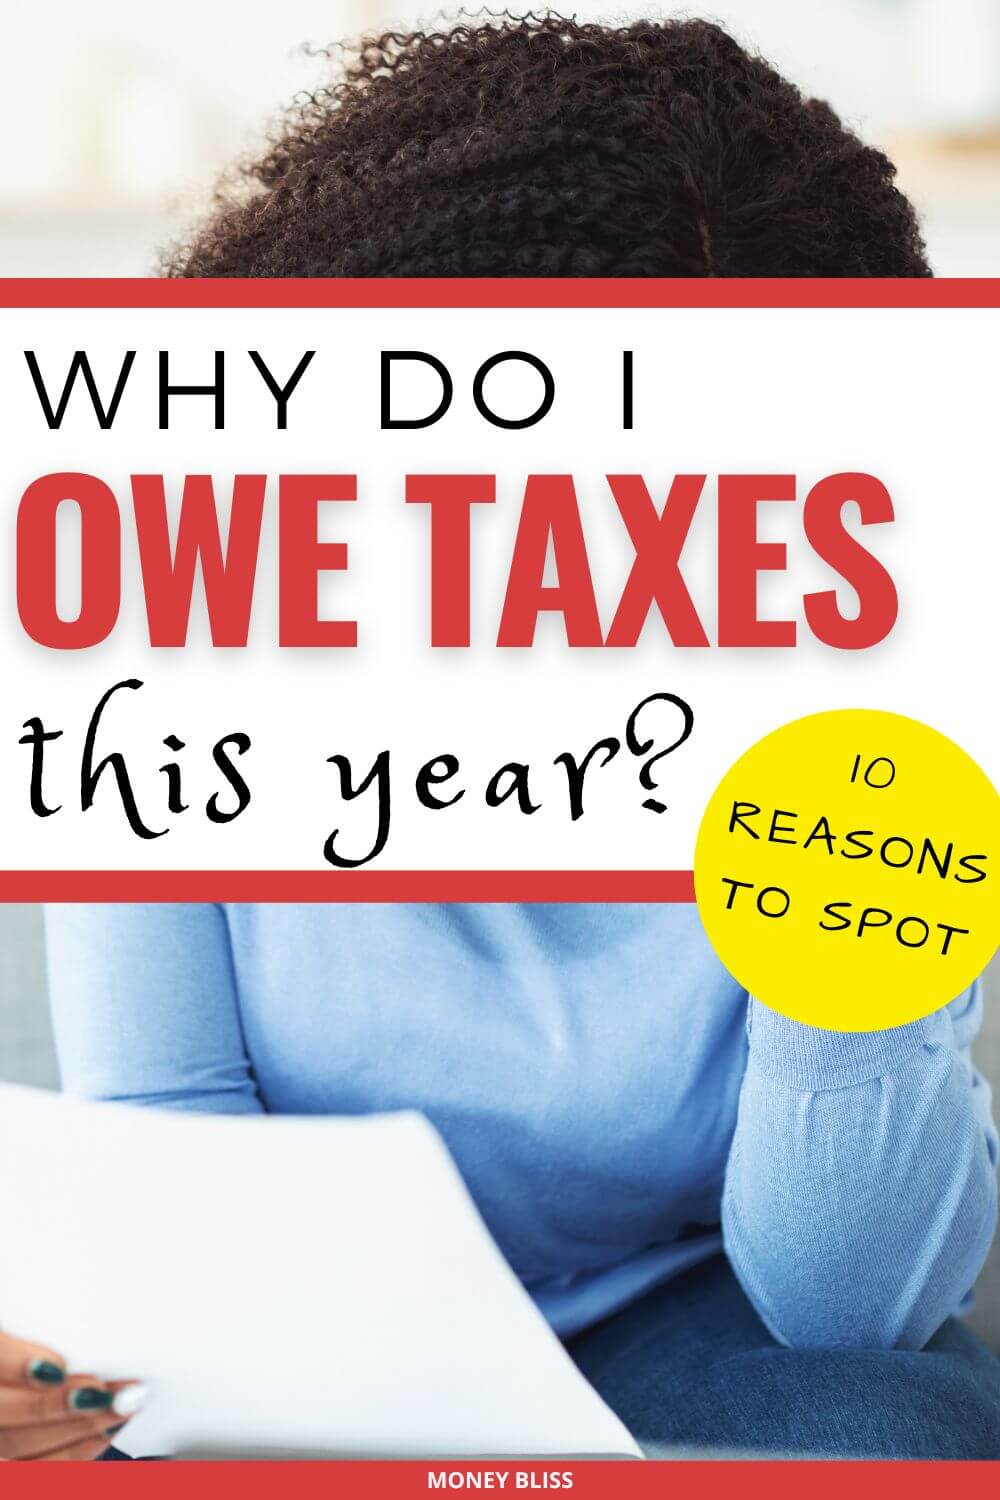 Why Do I Owe Taxes This Year? 10 Reasons To Spot Money Bliss